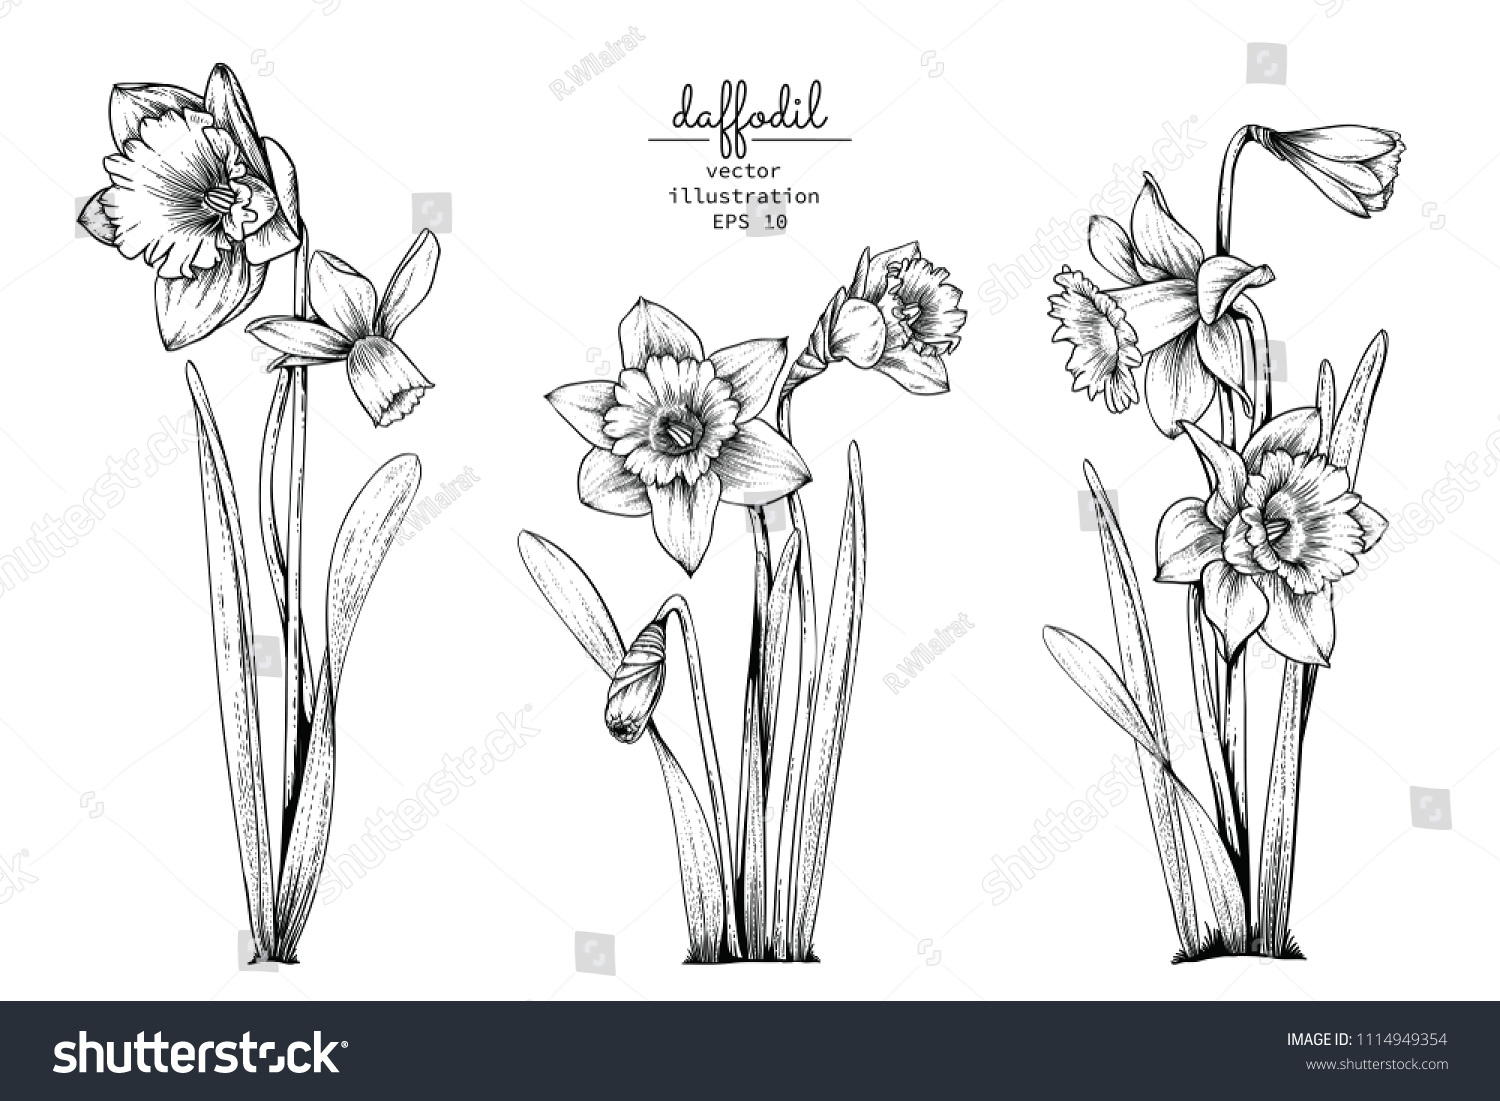 SVG of Sketch Floral Botany Collection. Daffodil or Narcissus flower drawings. Black and white with line art on white backgrounds. Hand Drawn Botanical Illustrations.Vector. svg